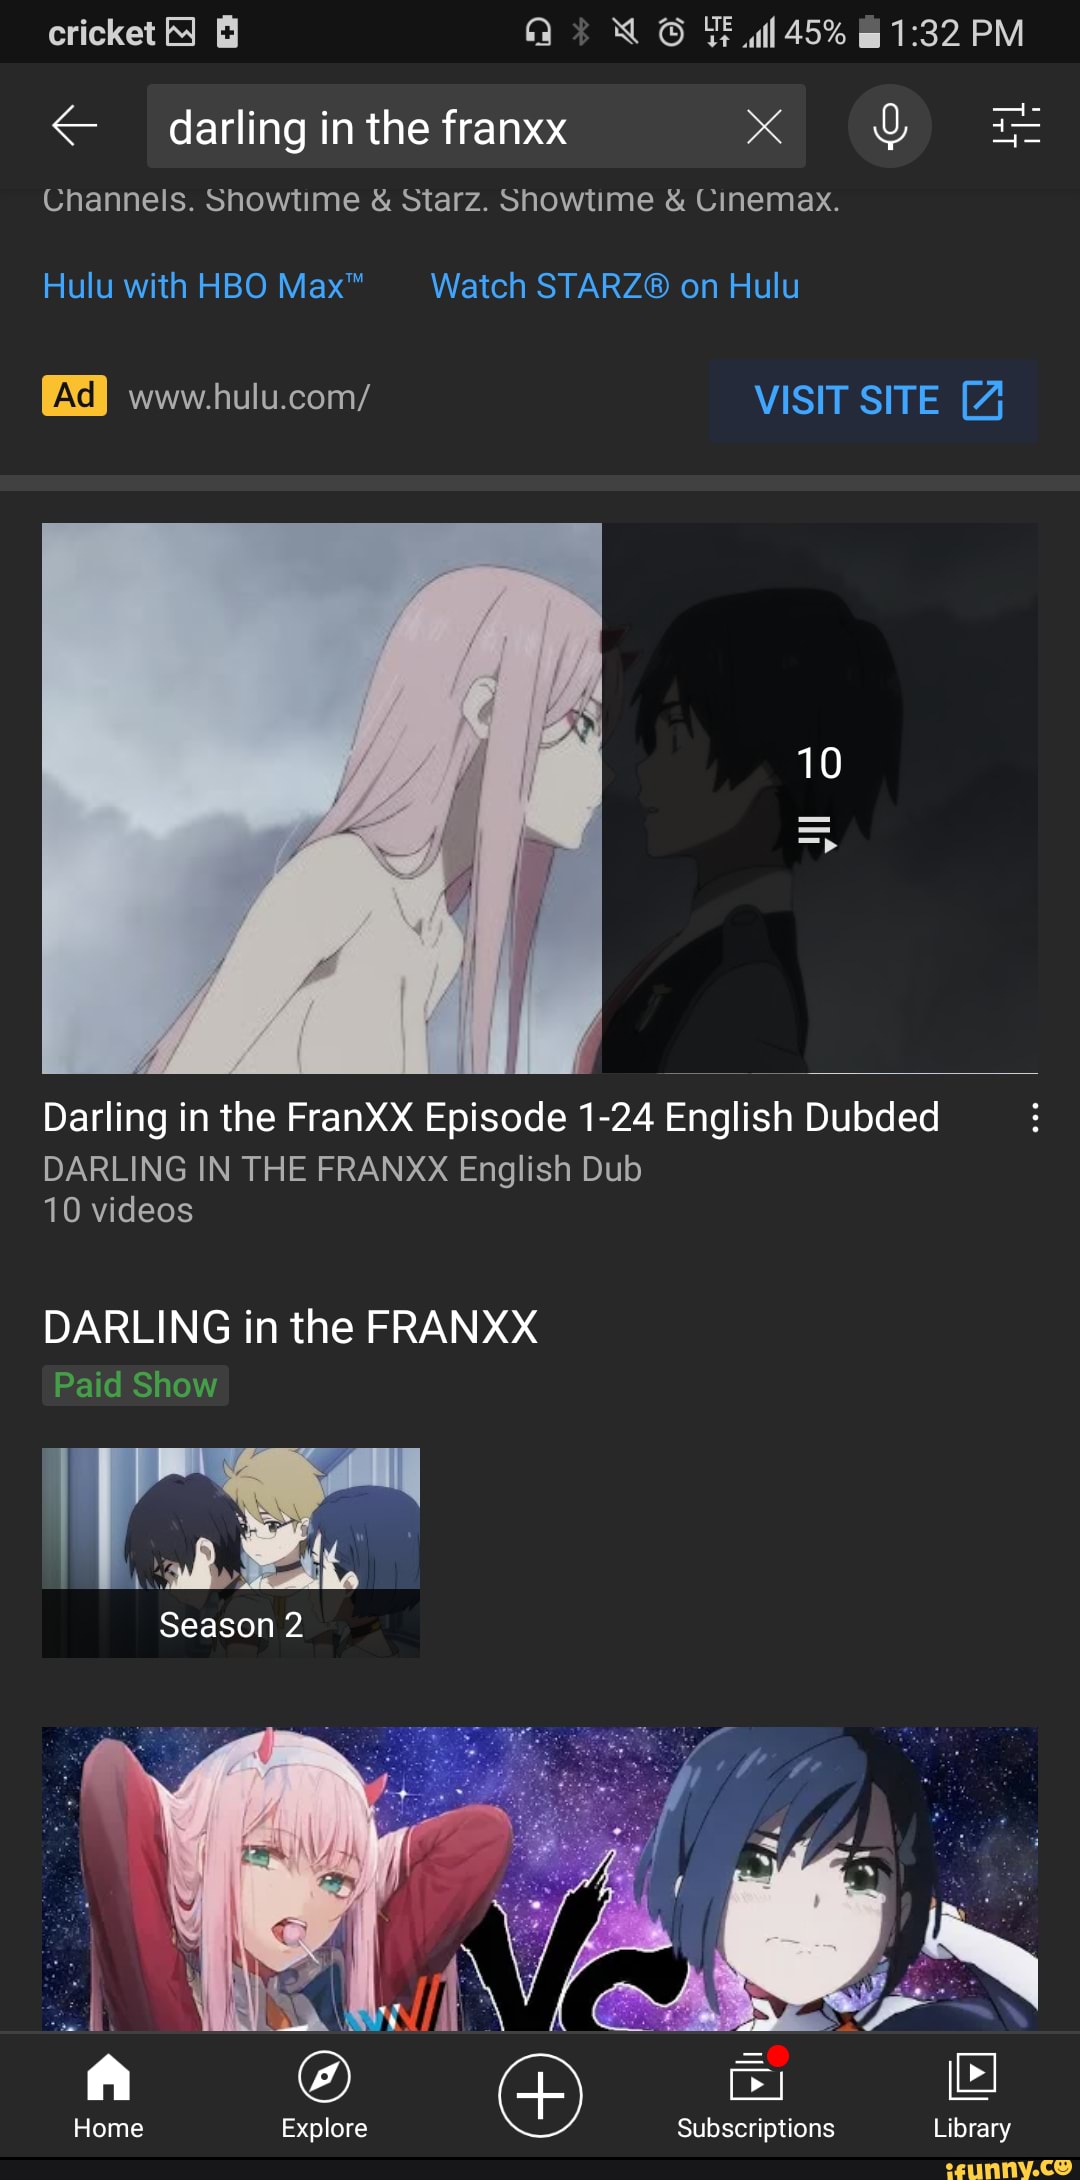 Cricket 45% PM darling in the franxx Channels. showtime starz